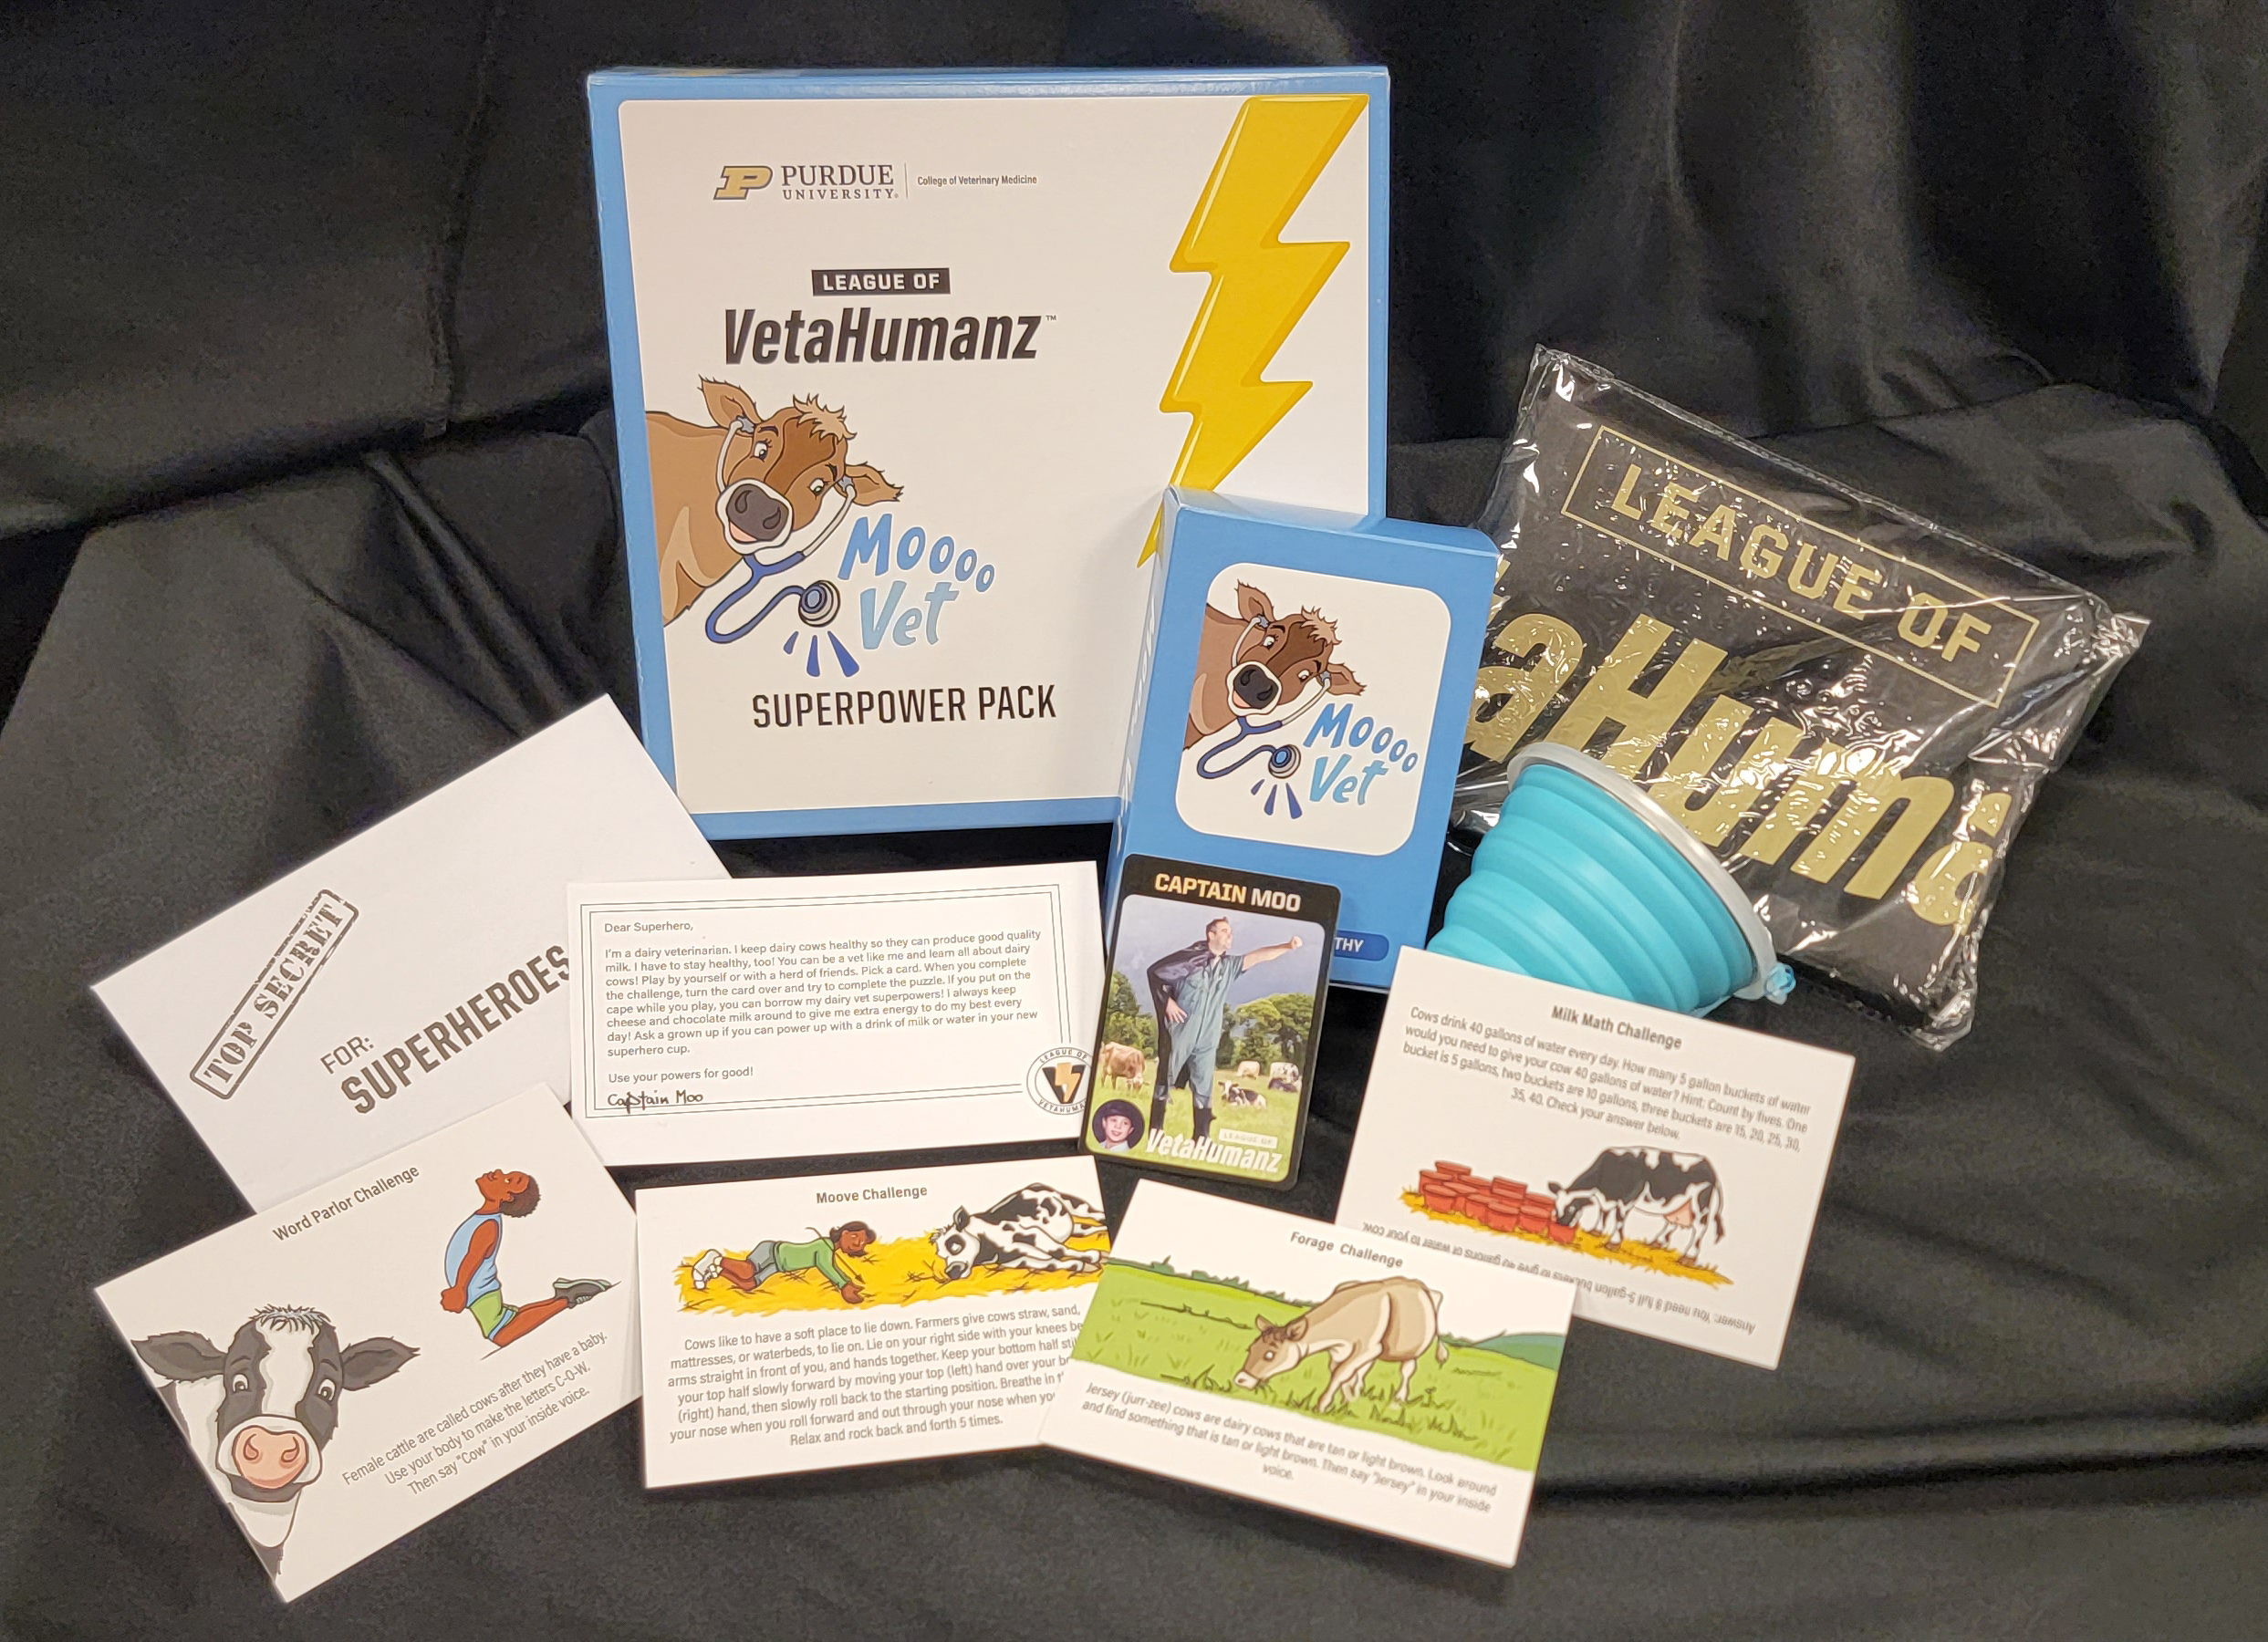 Moo Vet super power pack box contents including a cape and the Moo Vet game